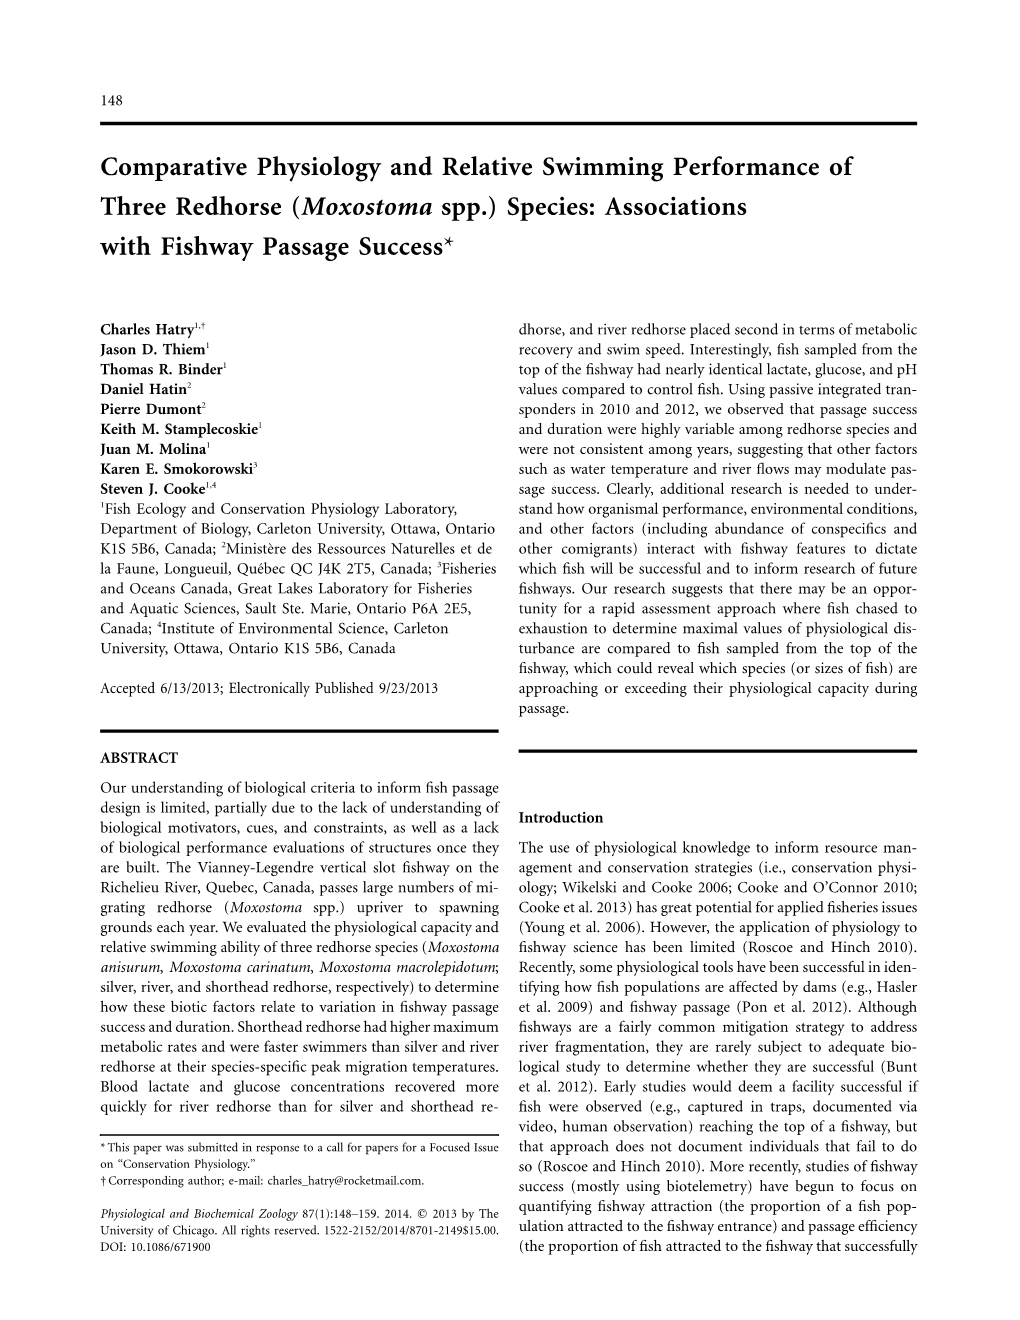 Comparative Physiology and Relative Swimming Performance of Three Redhorse (Moxostoma Spp.) Species: Associations with Fishway Passage Success*